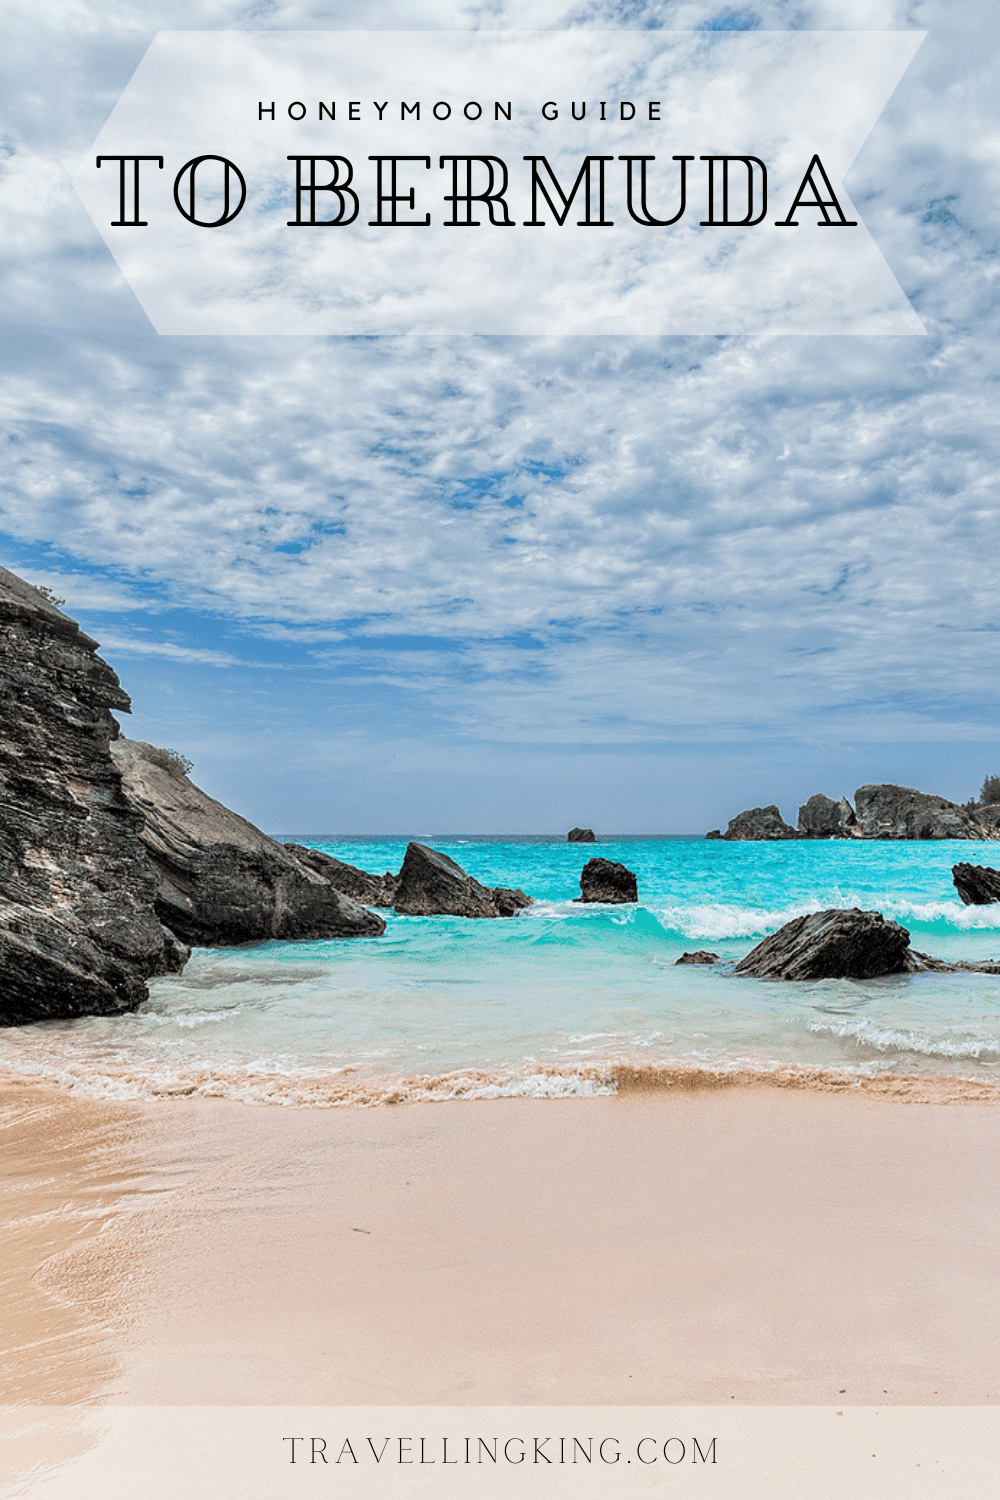 The Only Honeymoon Guide to Bermuda You’ll Ever Need!